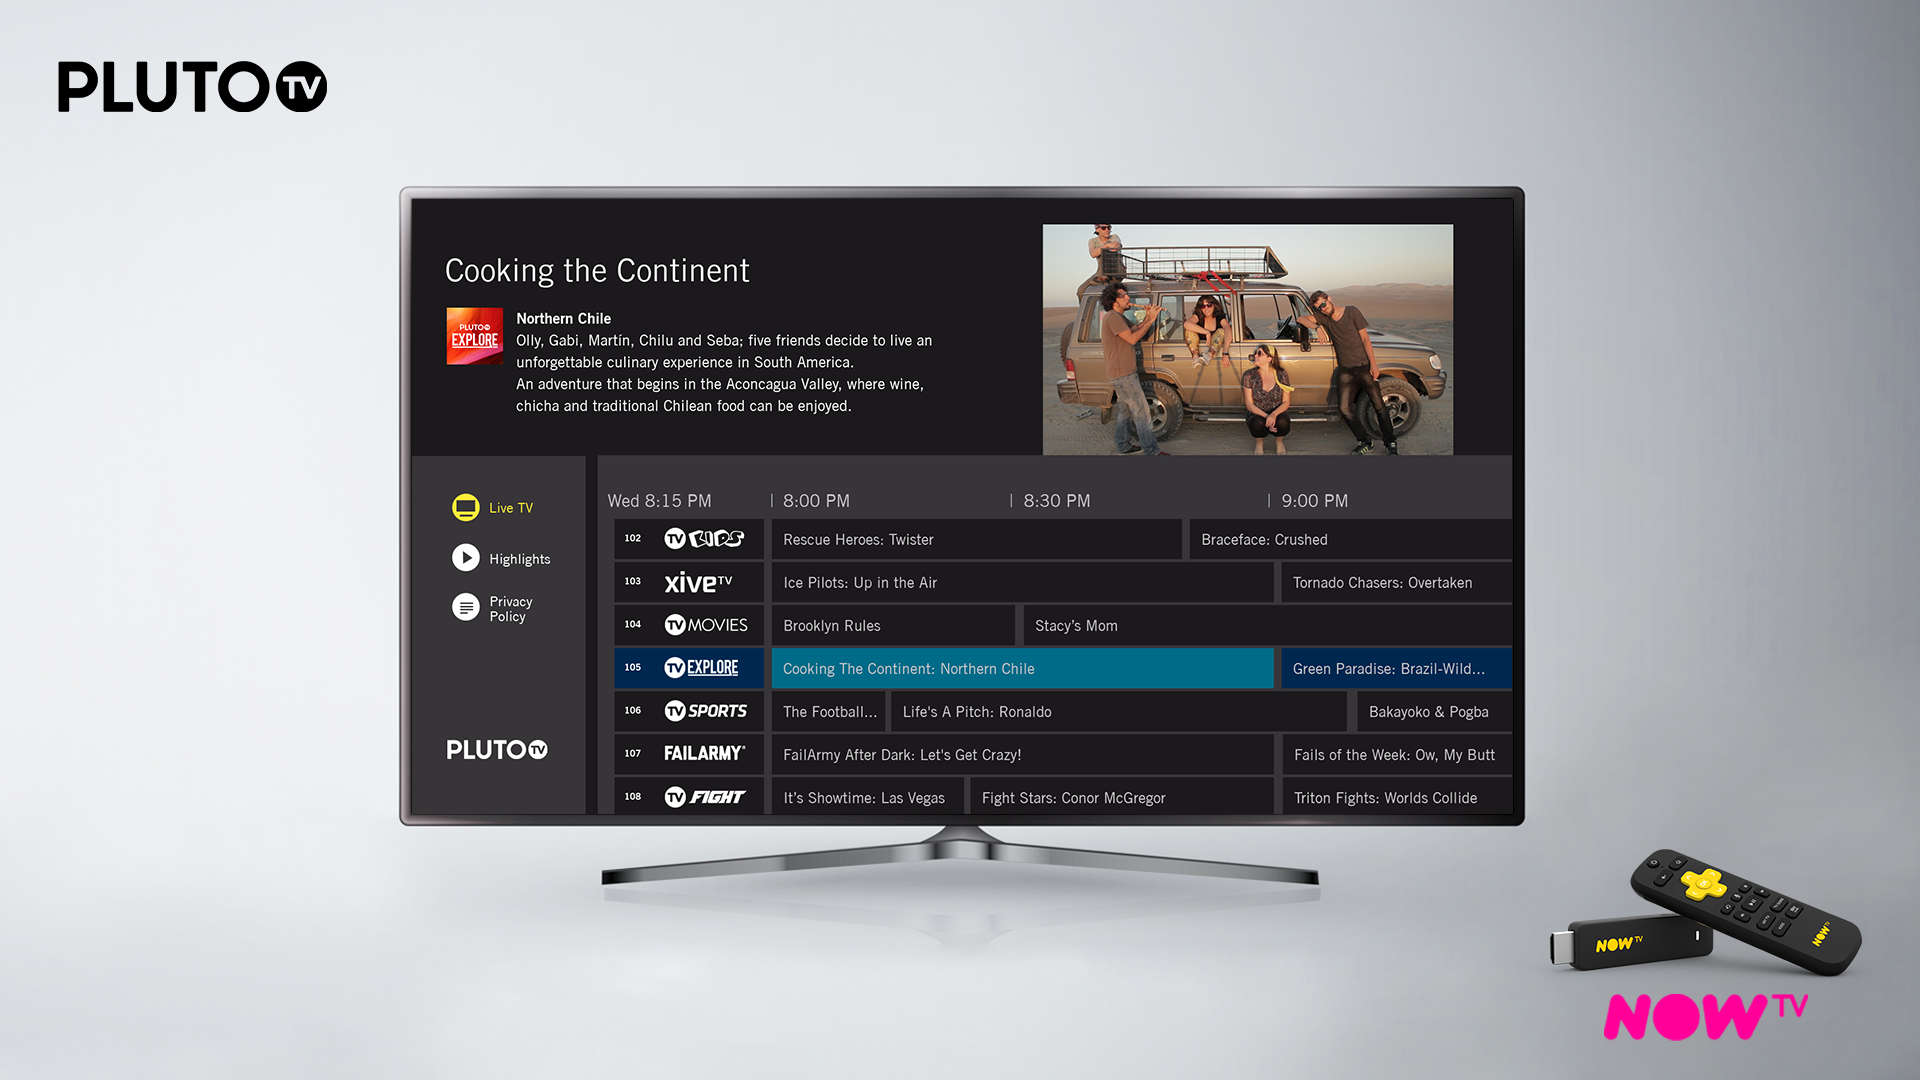 Plutotv For Smart Tv / 10 must-have Chromecast apps for streaming digital movies ... / It ...